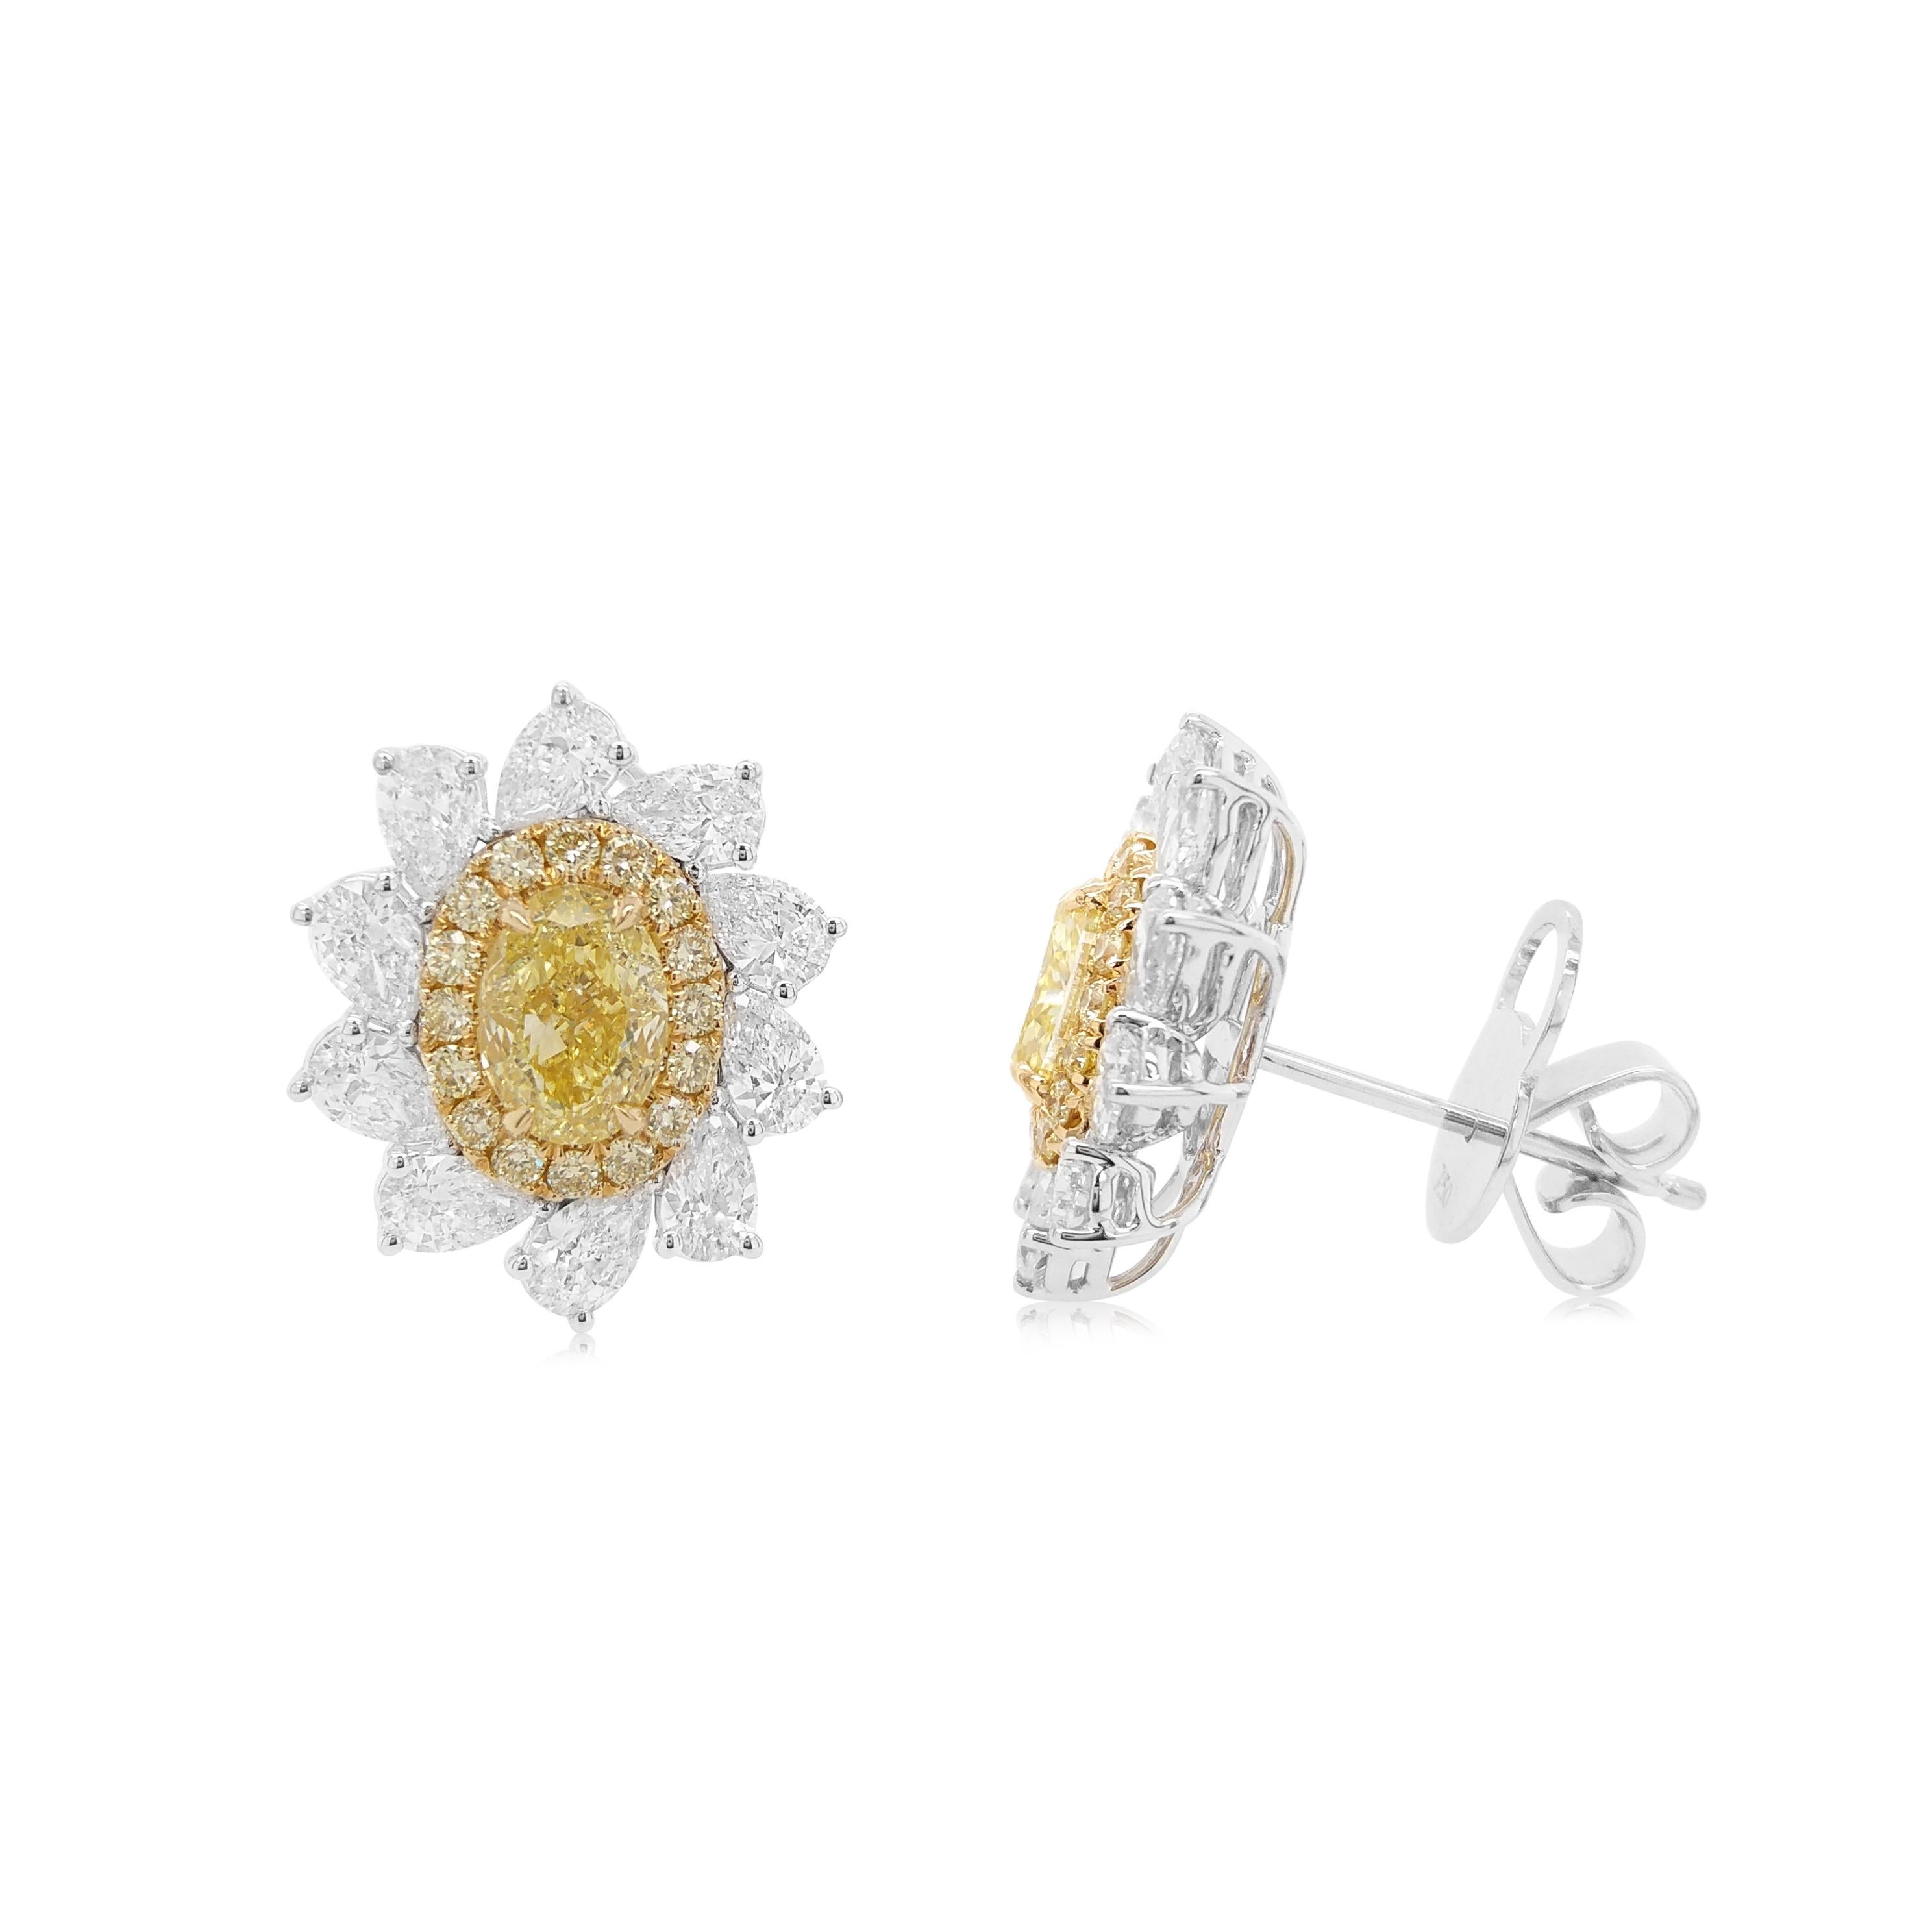 These unique 18K gold earrings feature oval-shape Yellow diamonds at the heart of the design. The rich colour of these diamonds is complimented perfectly by the delicate white gold, which is completed by a combination of pear-shaped white diamonds